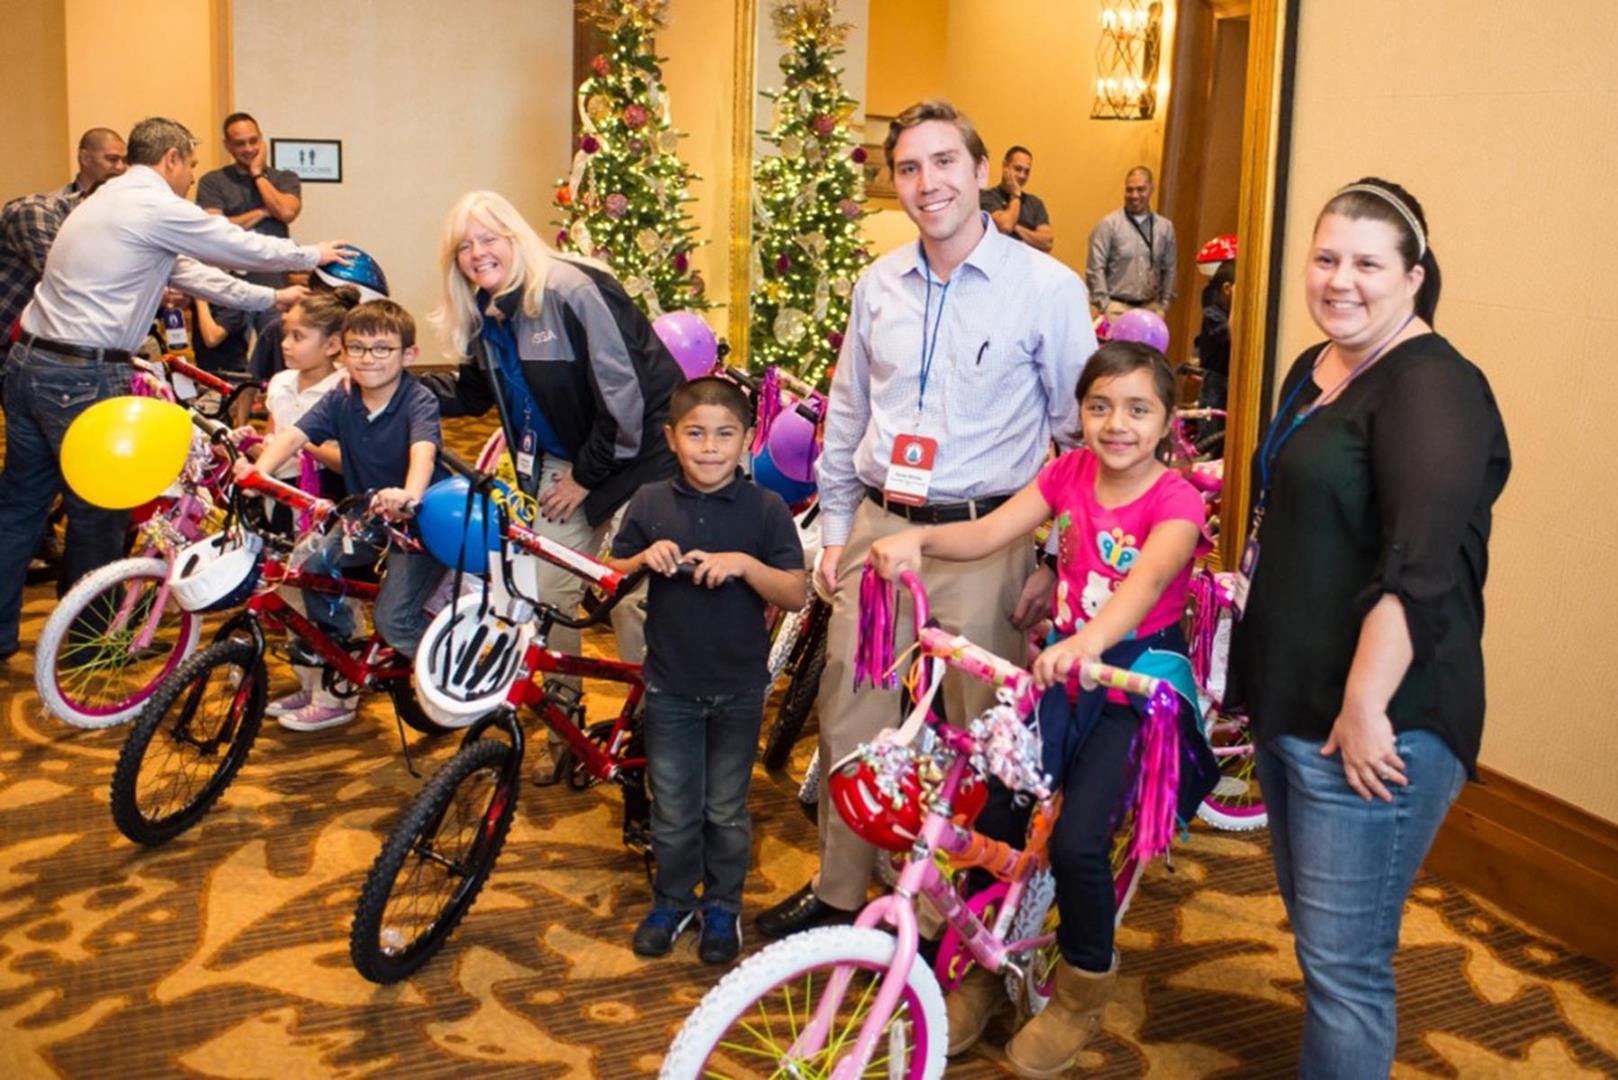 Parker Medley from Marco Island/Naples Sports helps kids choose a bike.